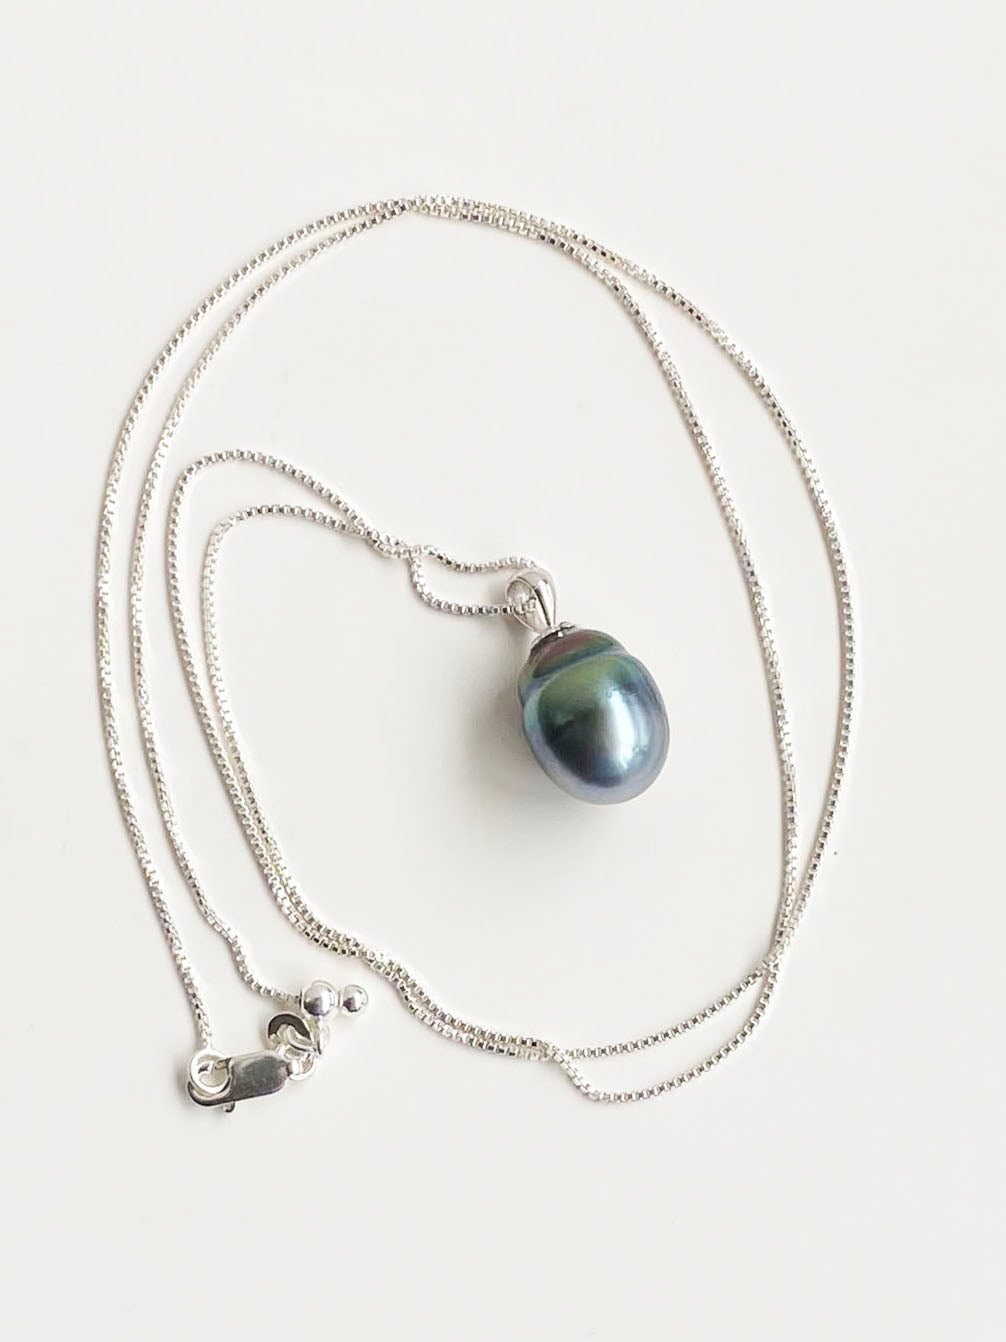 11-15mm Tahitian Pearl Pendant on 14k White Gold with Sterling Chain by Linda Queally